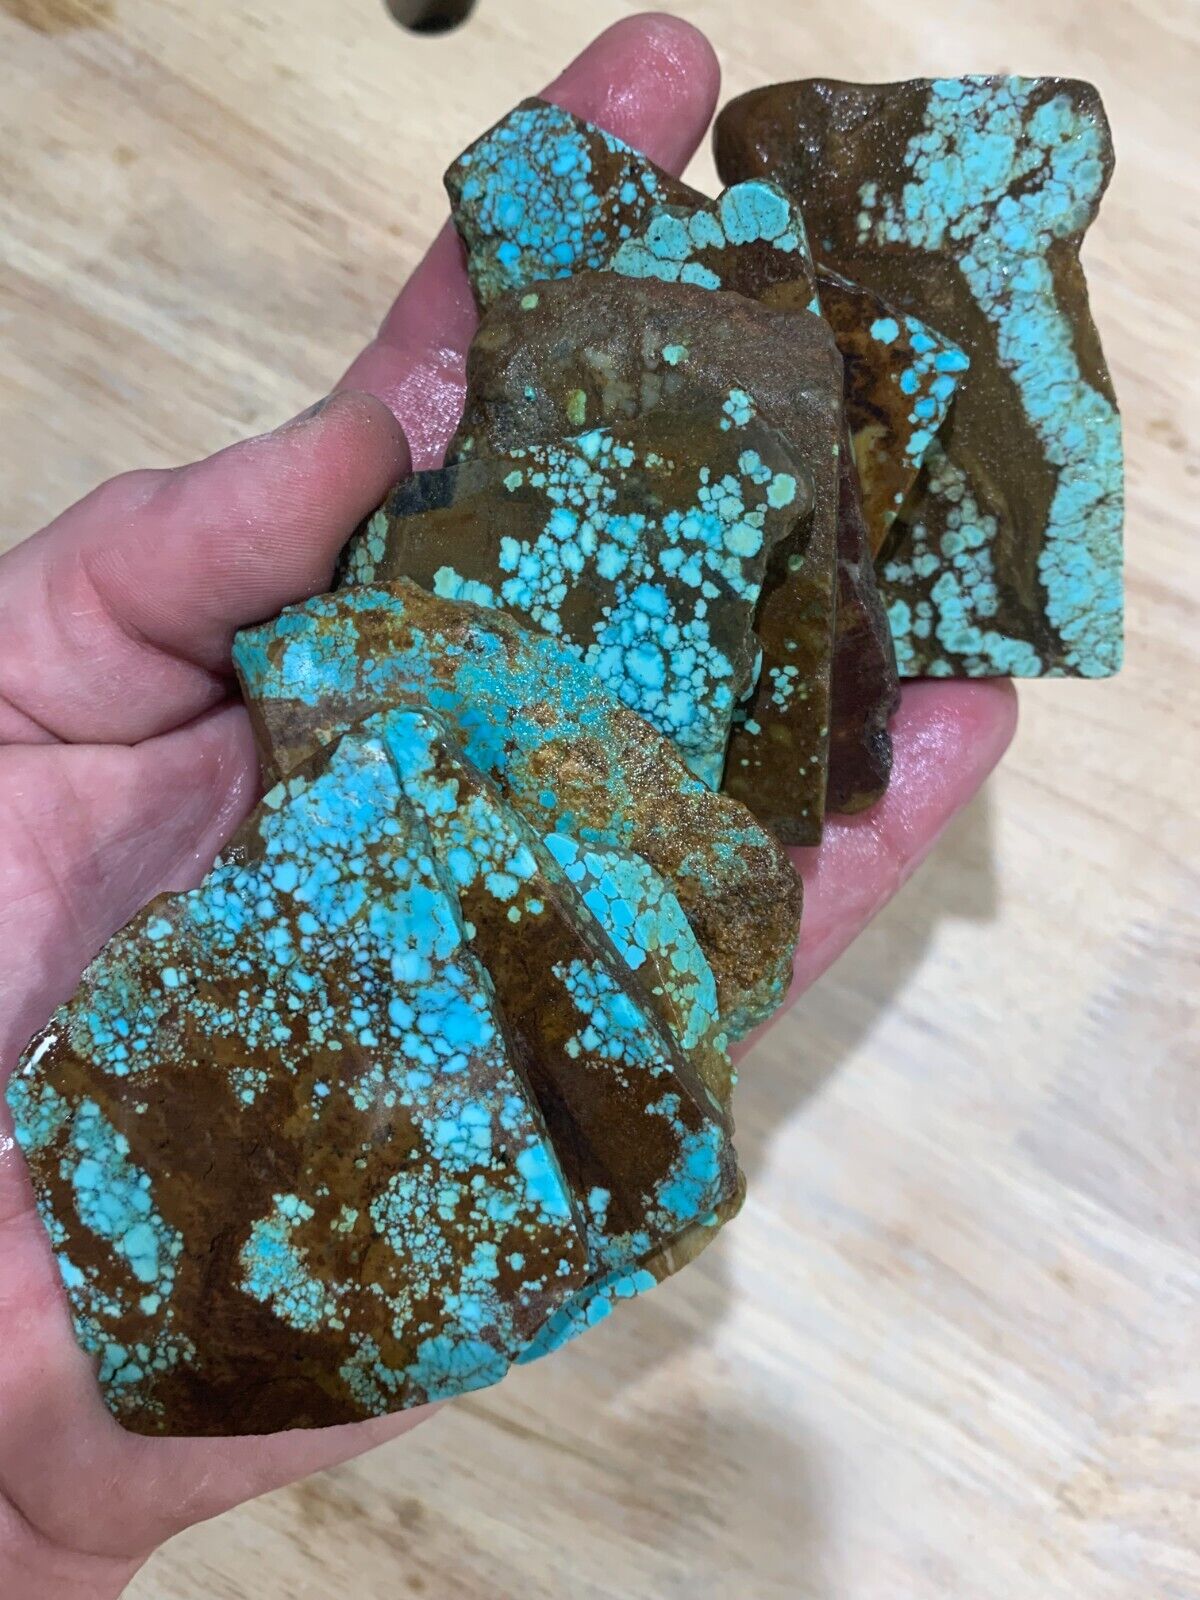 NV#8 Turquoise Slabs. No crumble. Double-stabilized. Limited Lots. Almost gone.